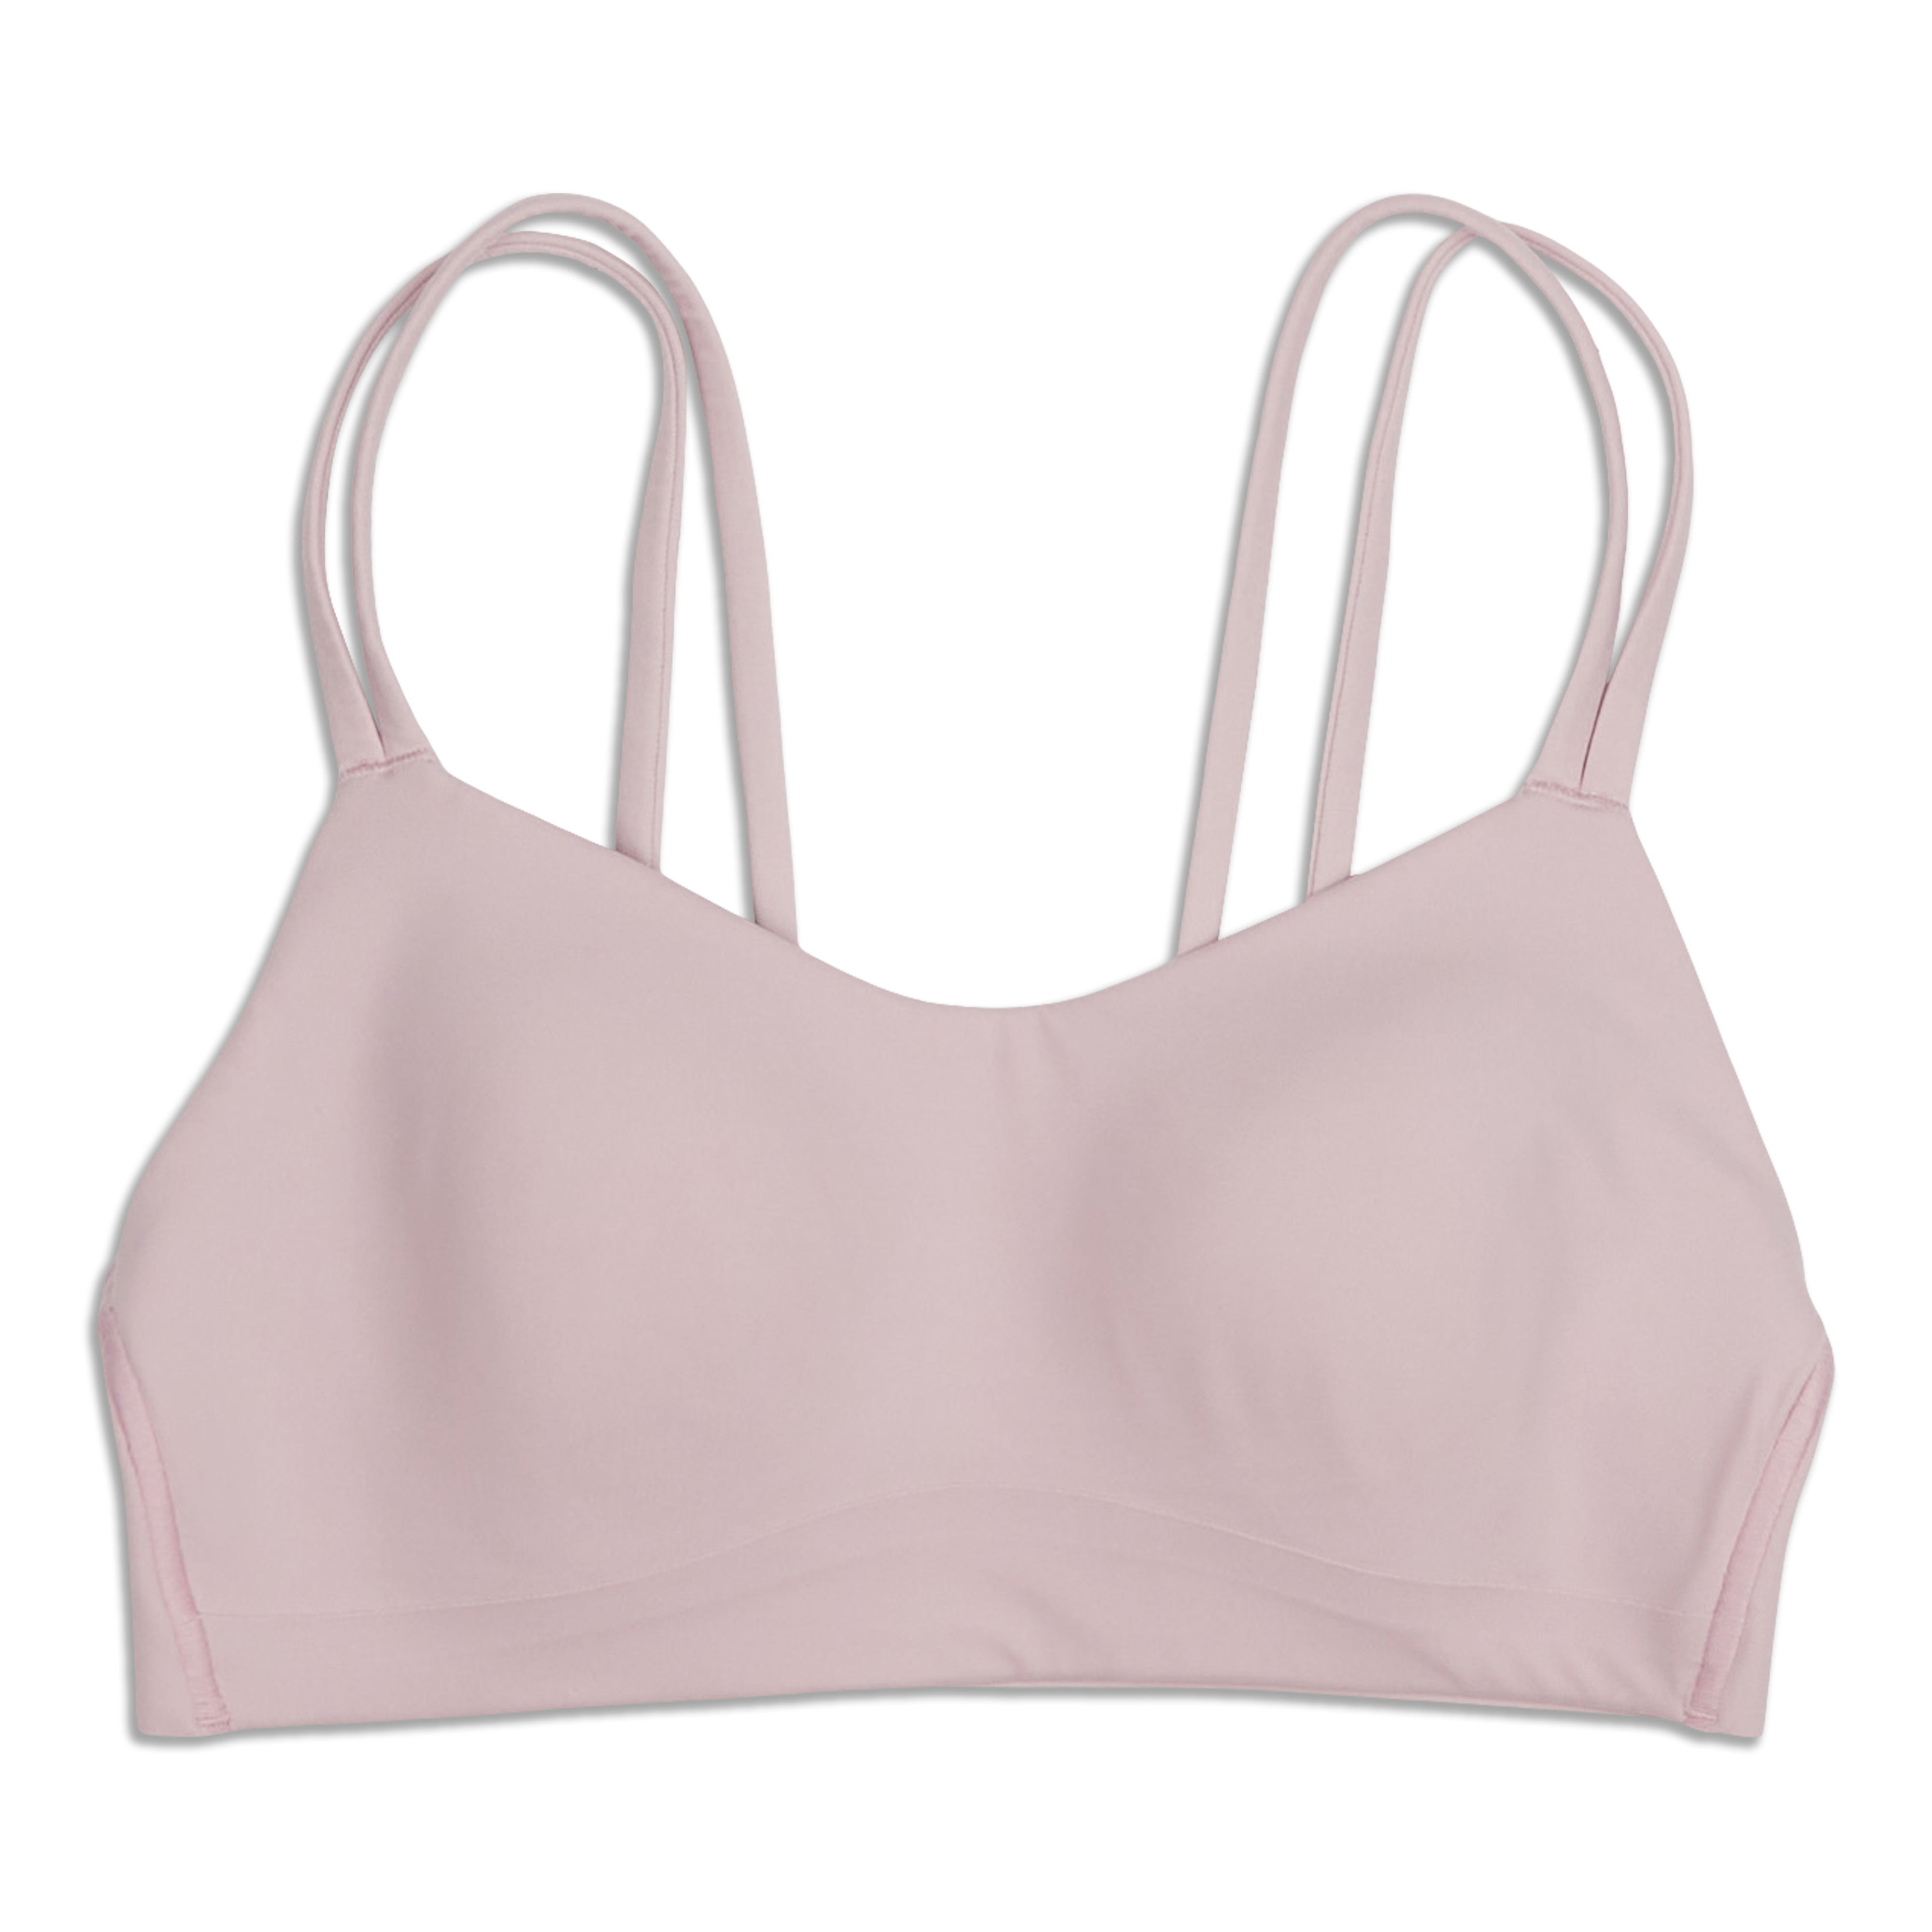 Like a Cloud Bra in Hazy Jade (2) randomly spotted at a GTA location! 🇨🇦  So happy about this find :) : r/lululemon